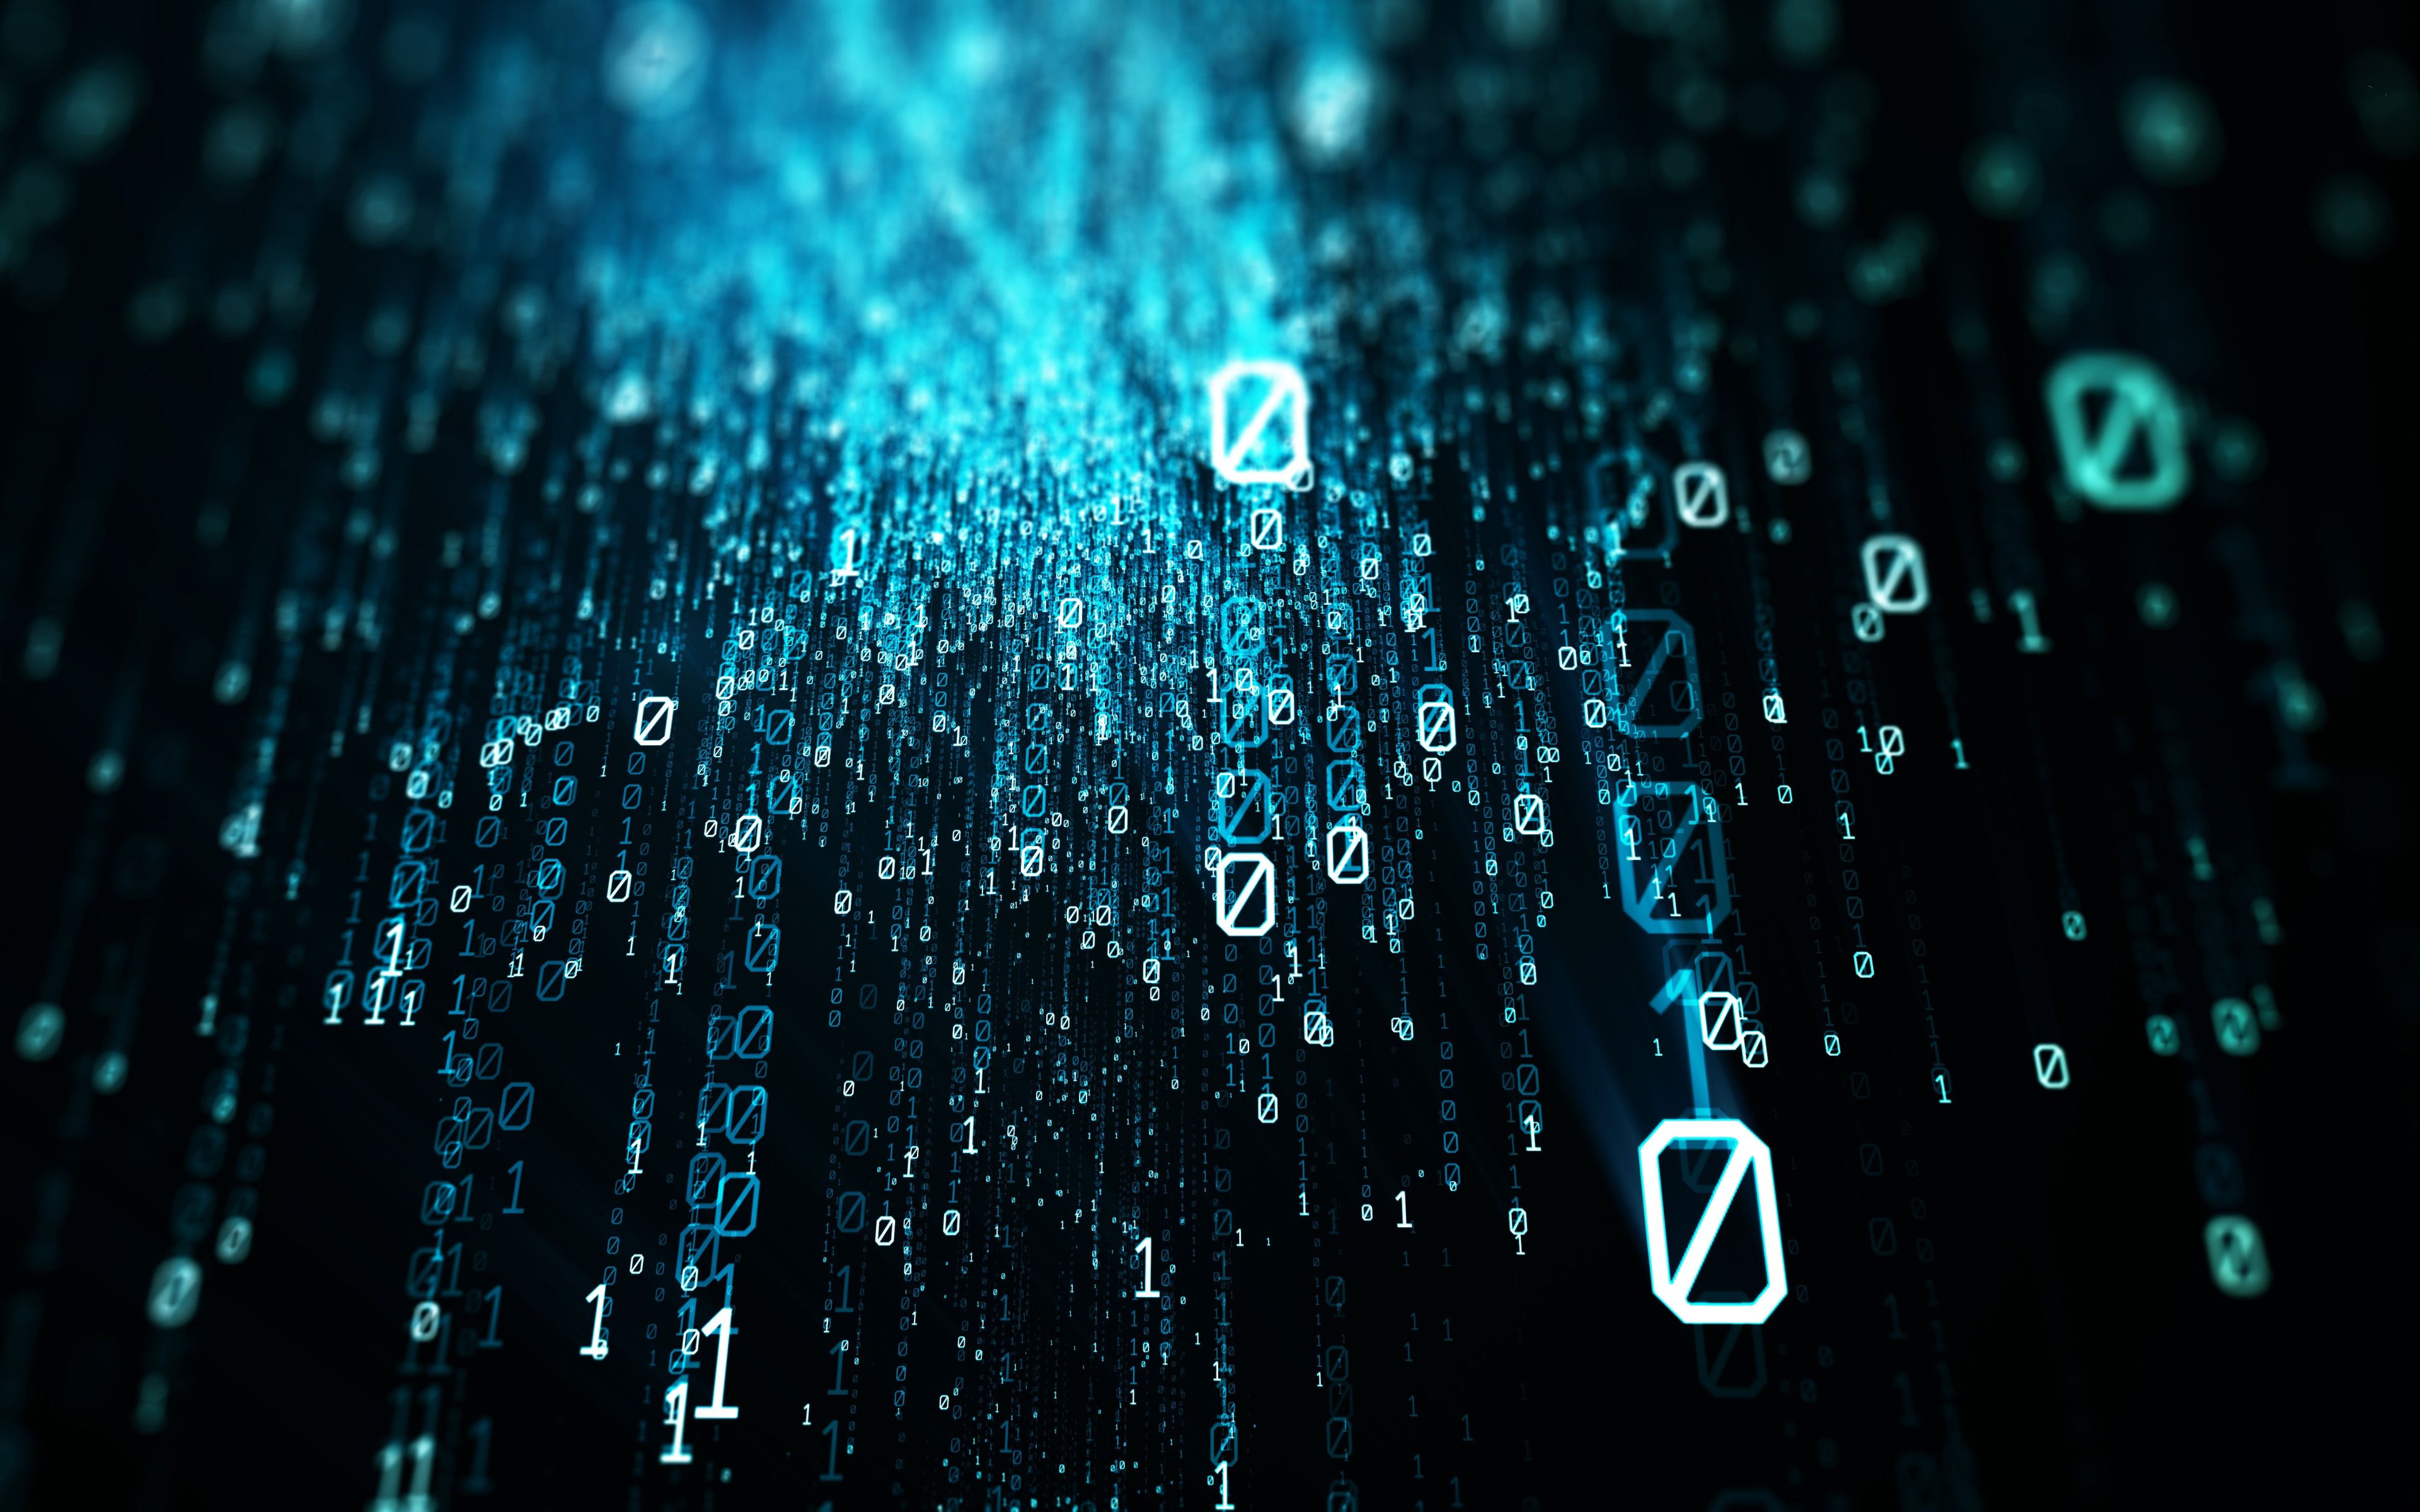 Download wallpaper binary code, 4k, computer code, programming, zeroes and units, digital art, binary digits for desktop with resolution 3840x2400. High Quality HD picture wallpaper